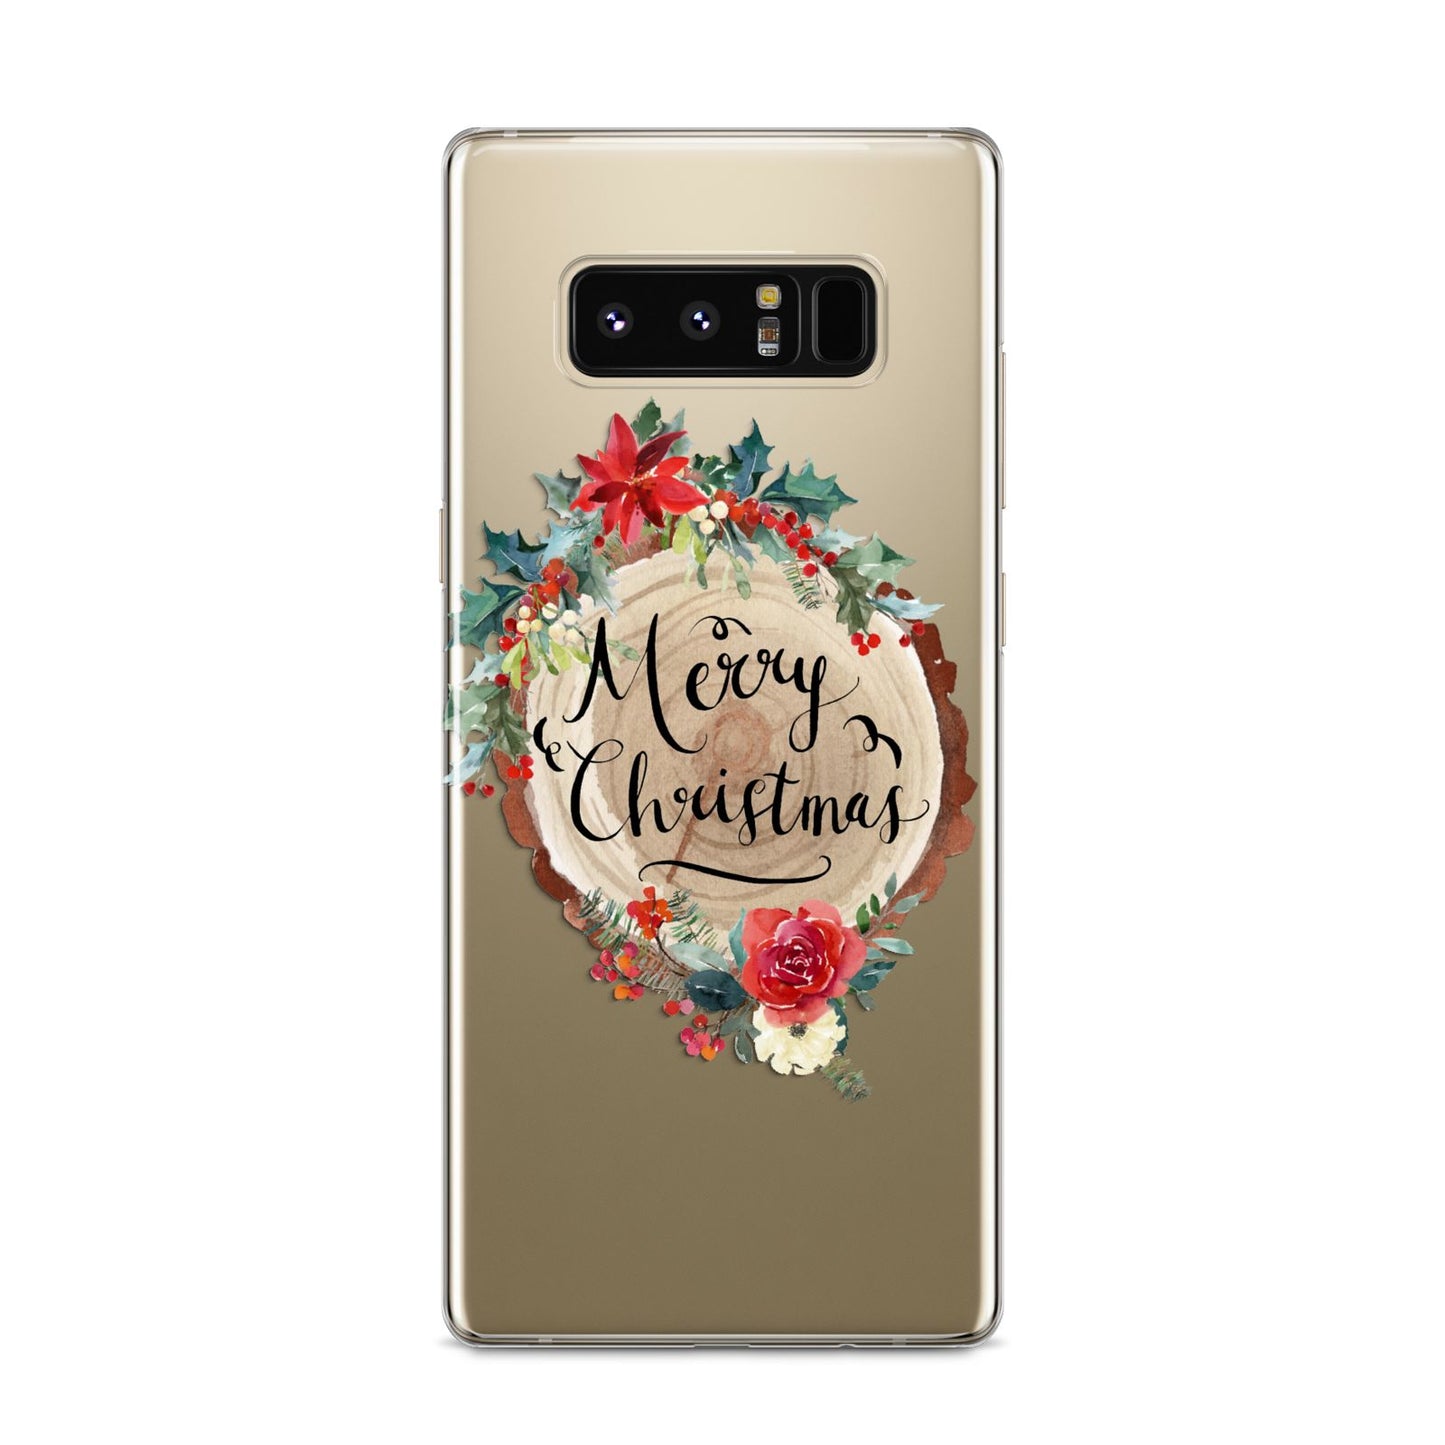 Merry Christmas Log Floral Samsung Galaxy S8 Case